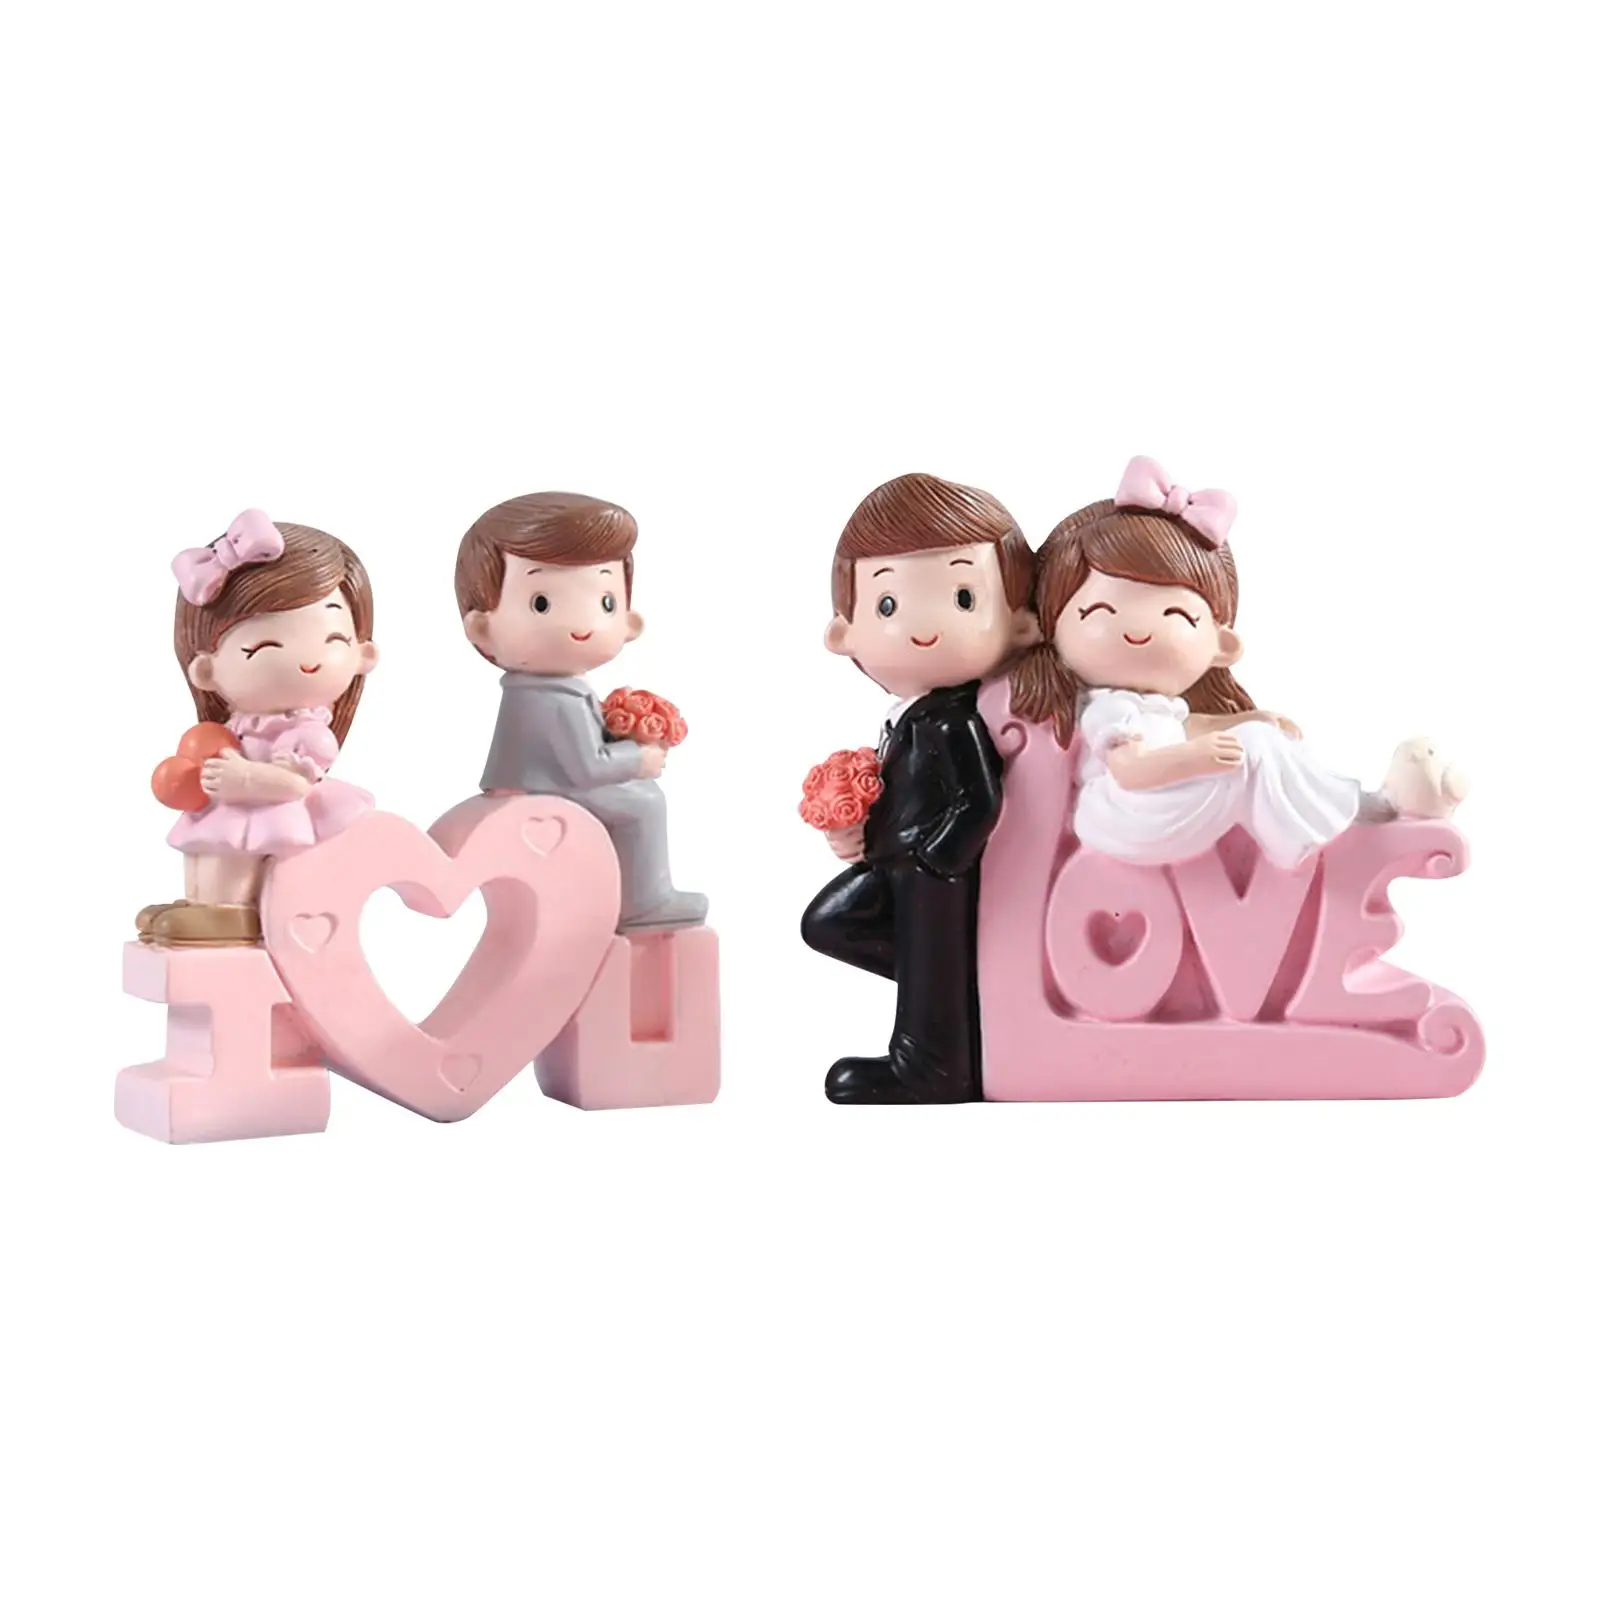 Resin Couple Statue Romantic Ornaments Present Sculpture for Wedding Valentine`S Day Shop Window Themed Party Living Room